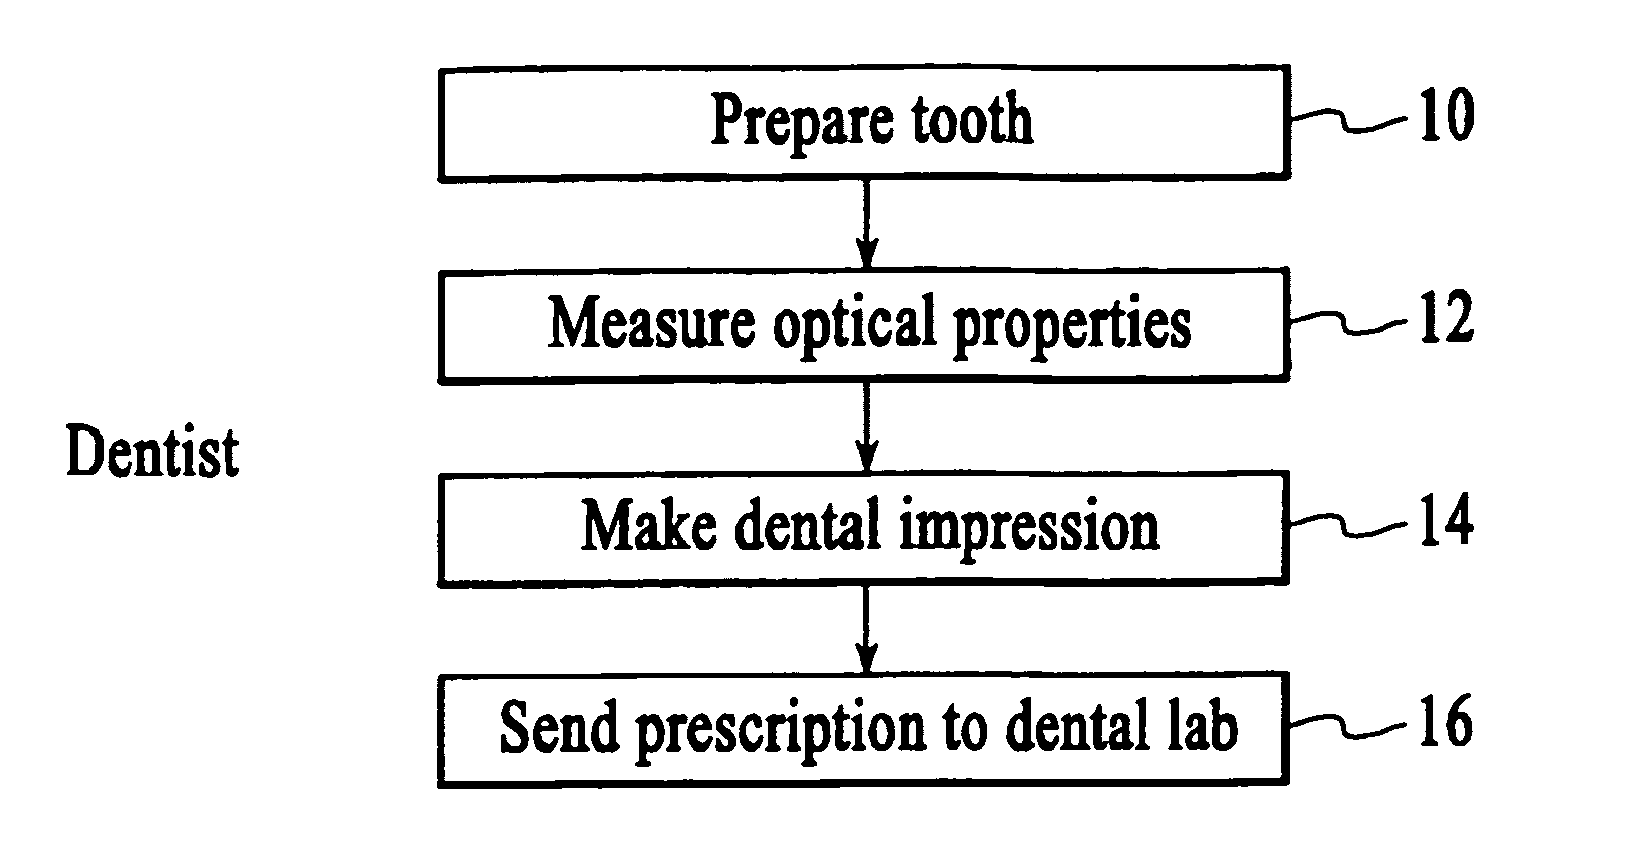 Systems and methods for preparing dental restorations